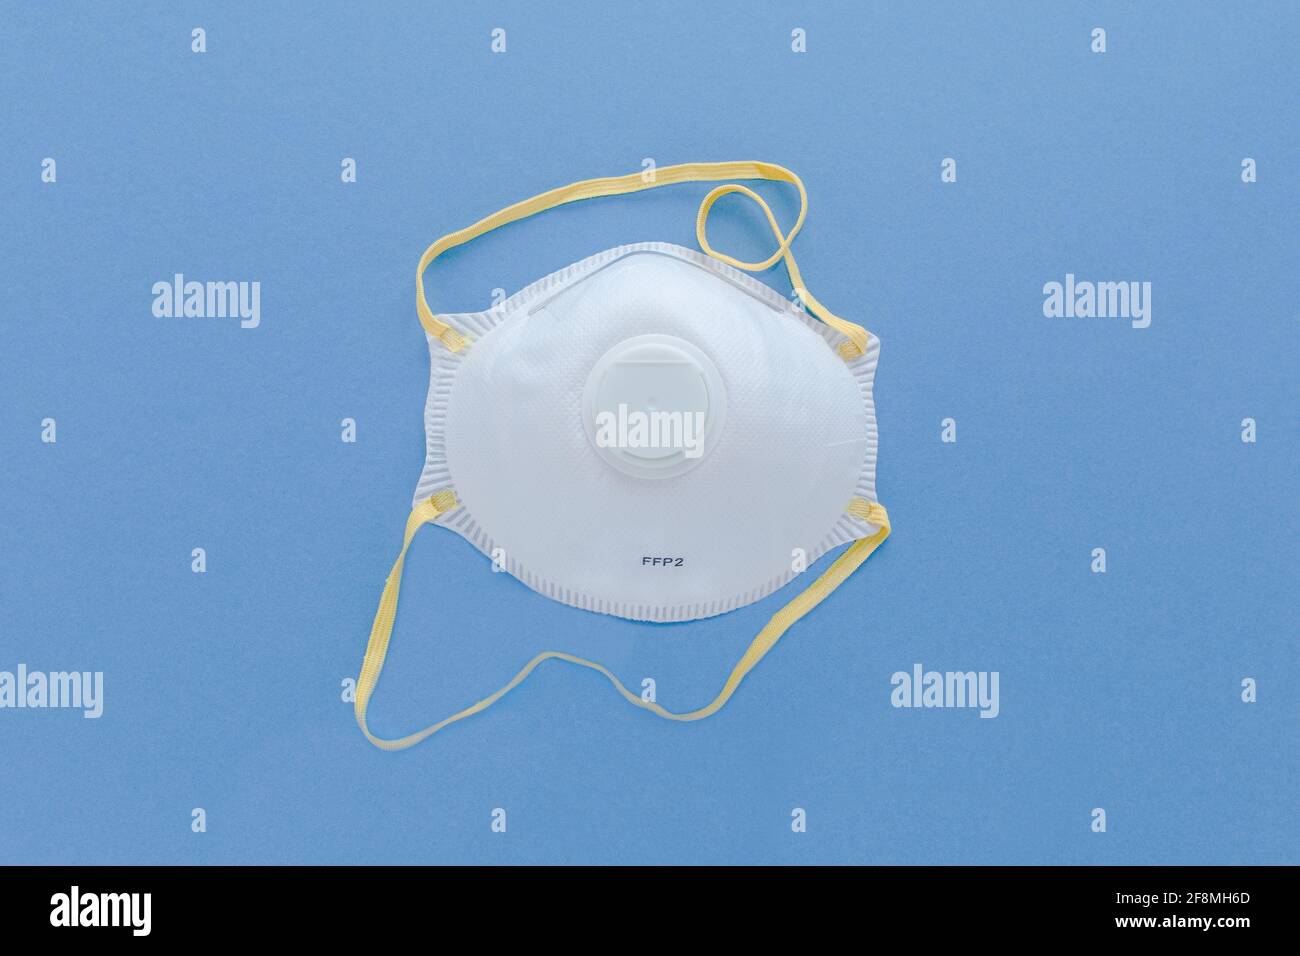 White FFP2,  N95  Industrial Respirator  filter Safety mask isolated on blue background. Protection from bacterias and virus,  included Covid-19 Stock Photo